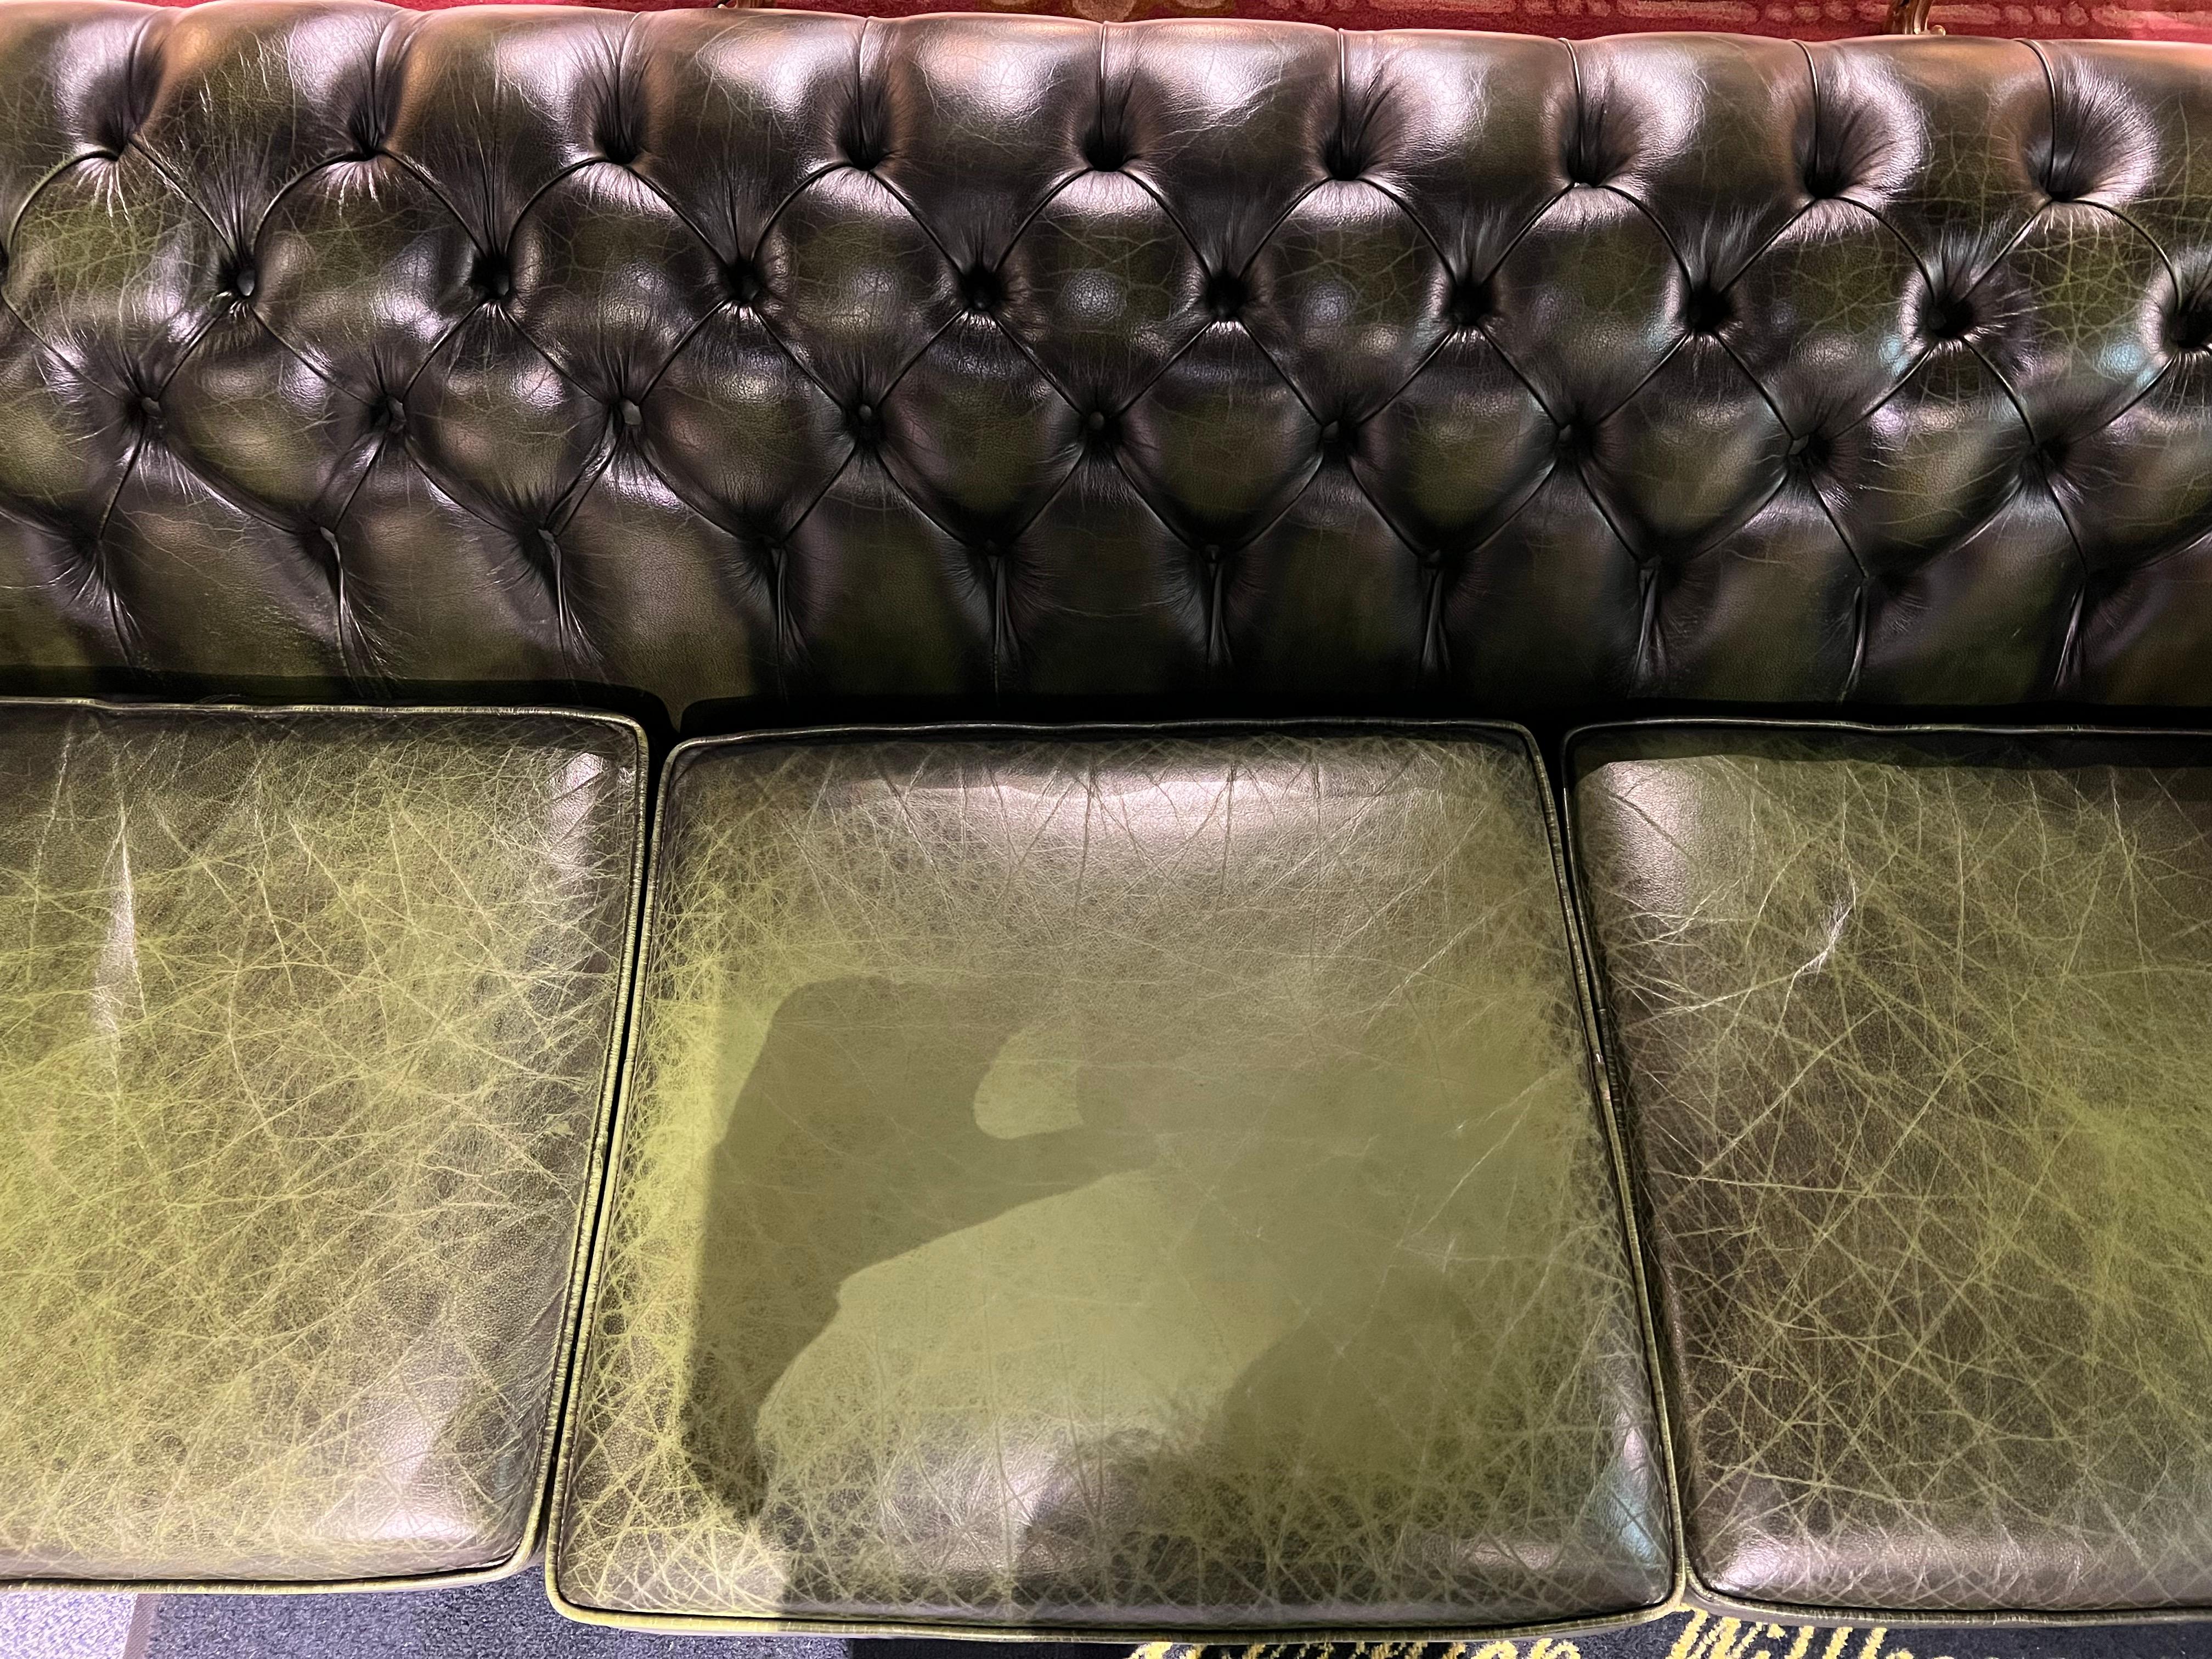 This original beautifully preserved dark green leather Large 4-seater sofa is very masculine and big enough for an office. Coil sprung feather filled cushions - Vintage green leather Chesterfield sofa with original coil sprung front edge and feather